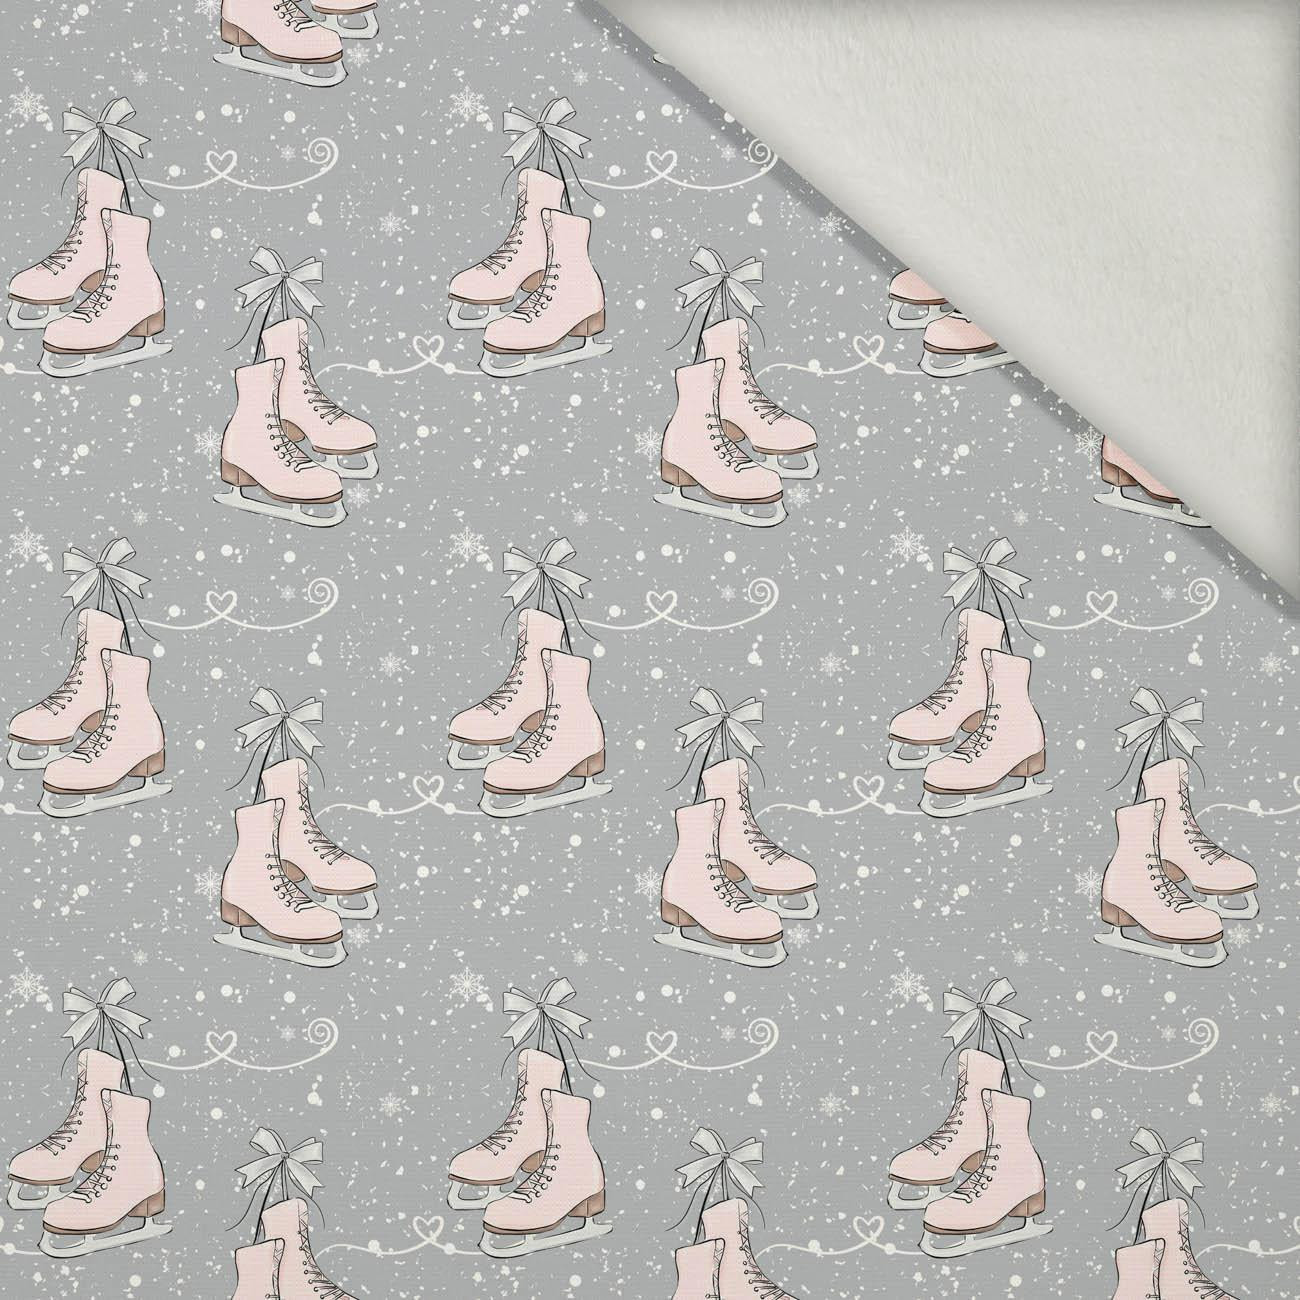 PINK ICE SKATES (WINTER)  - brushed knit fabric with teddy / alpine fleece